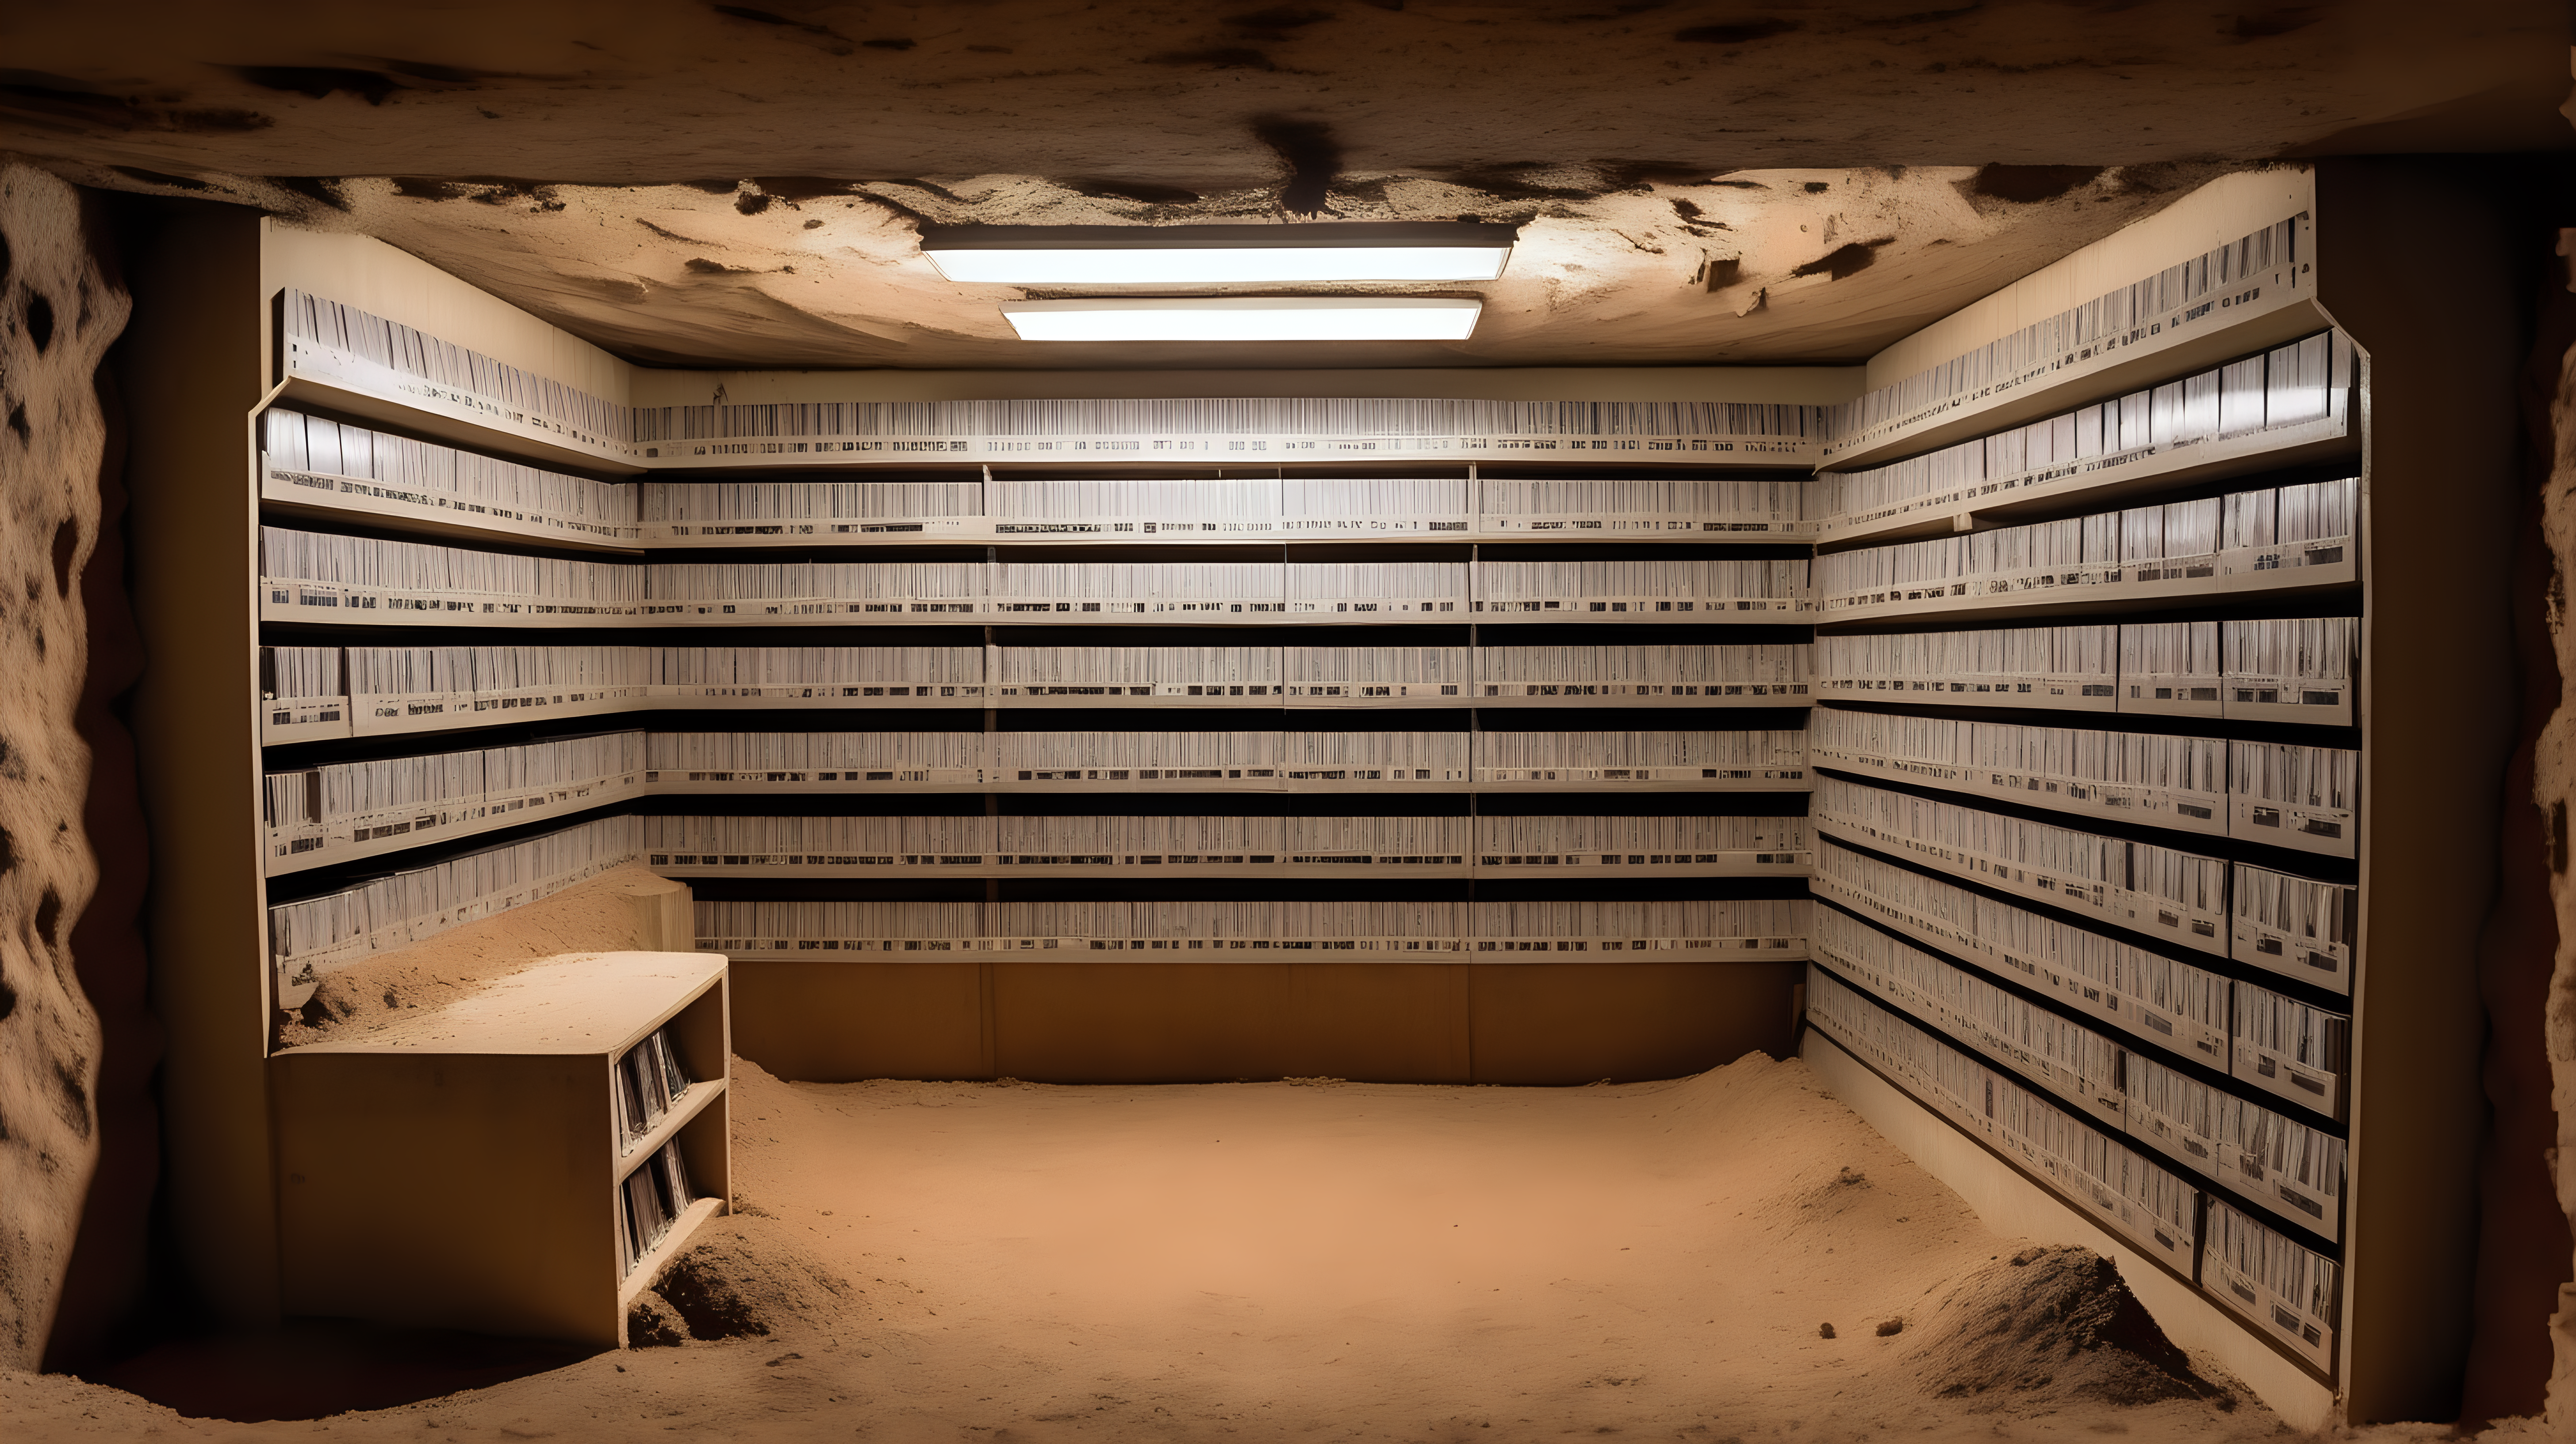  a cross section of an underground bunker with a large shelf full of videotapes. The bunker is surrounded by dirt on the exterior of it's walls.   in the style of a  wes anderson film